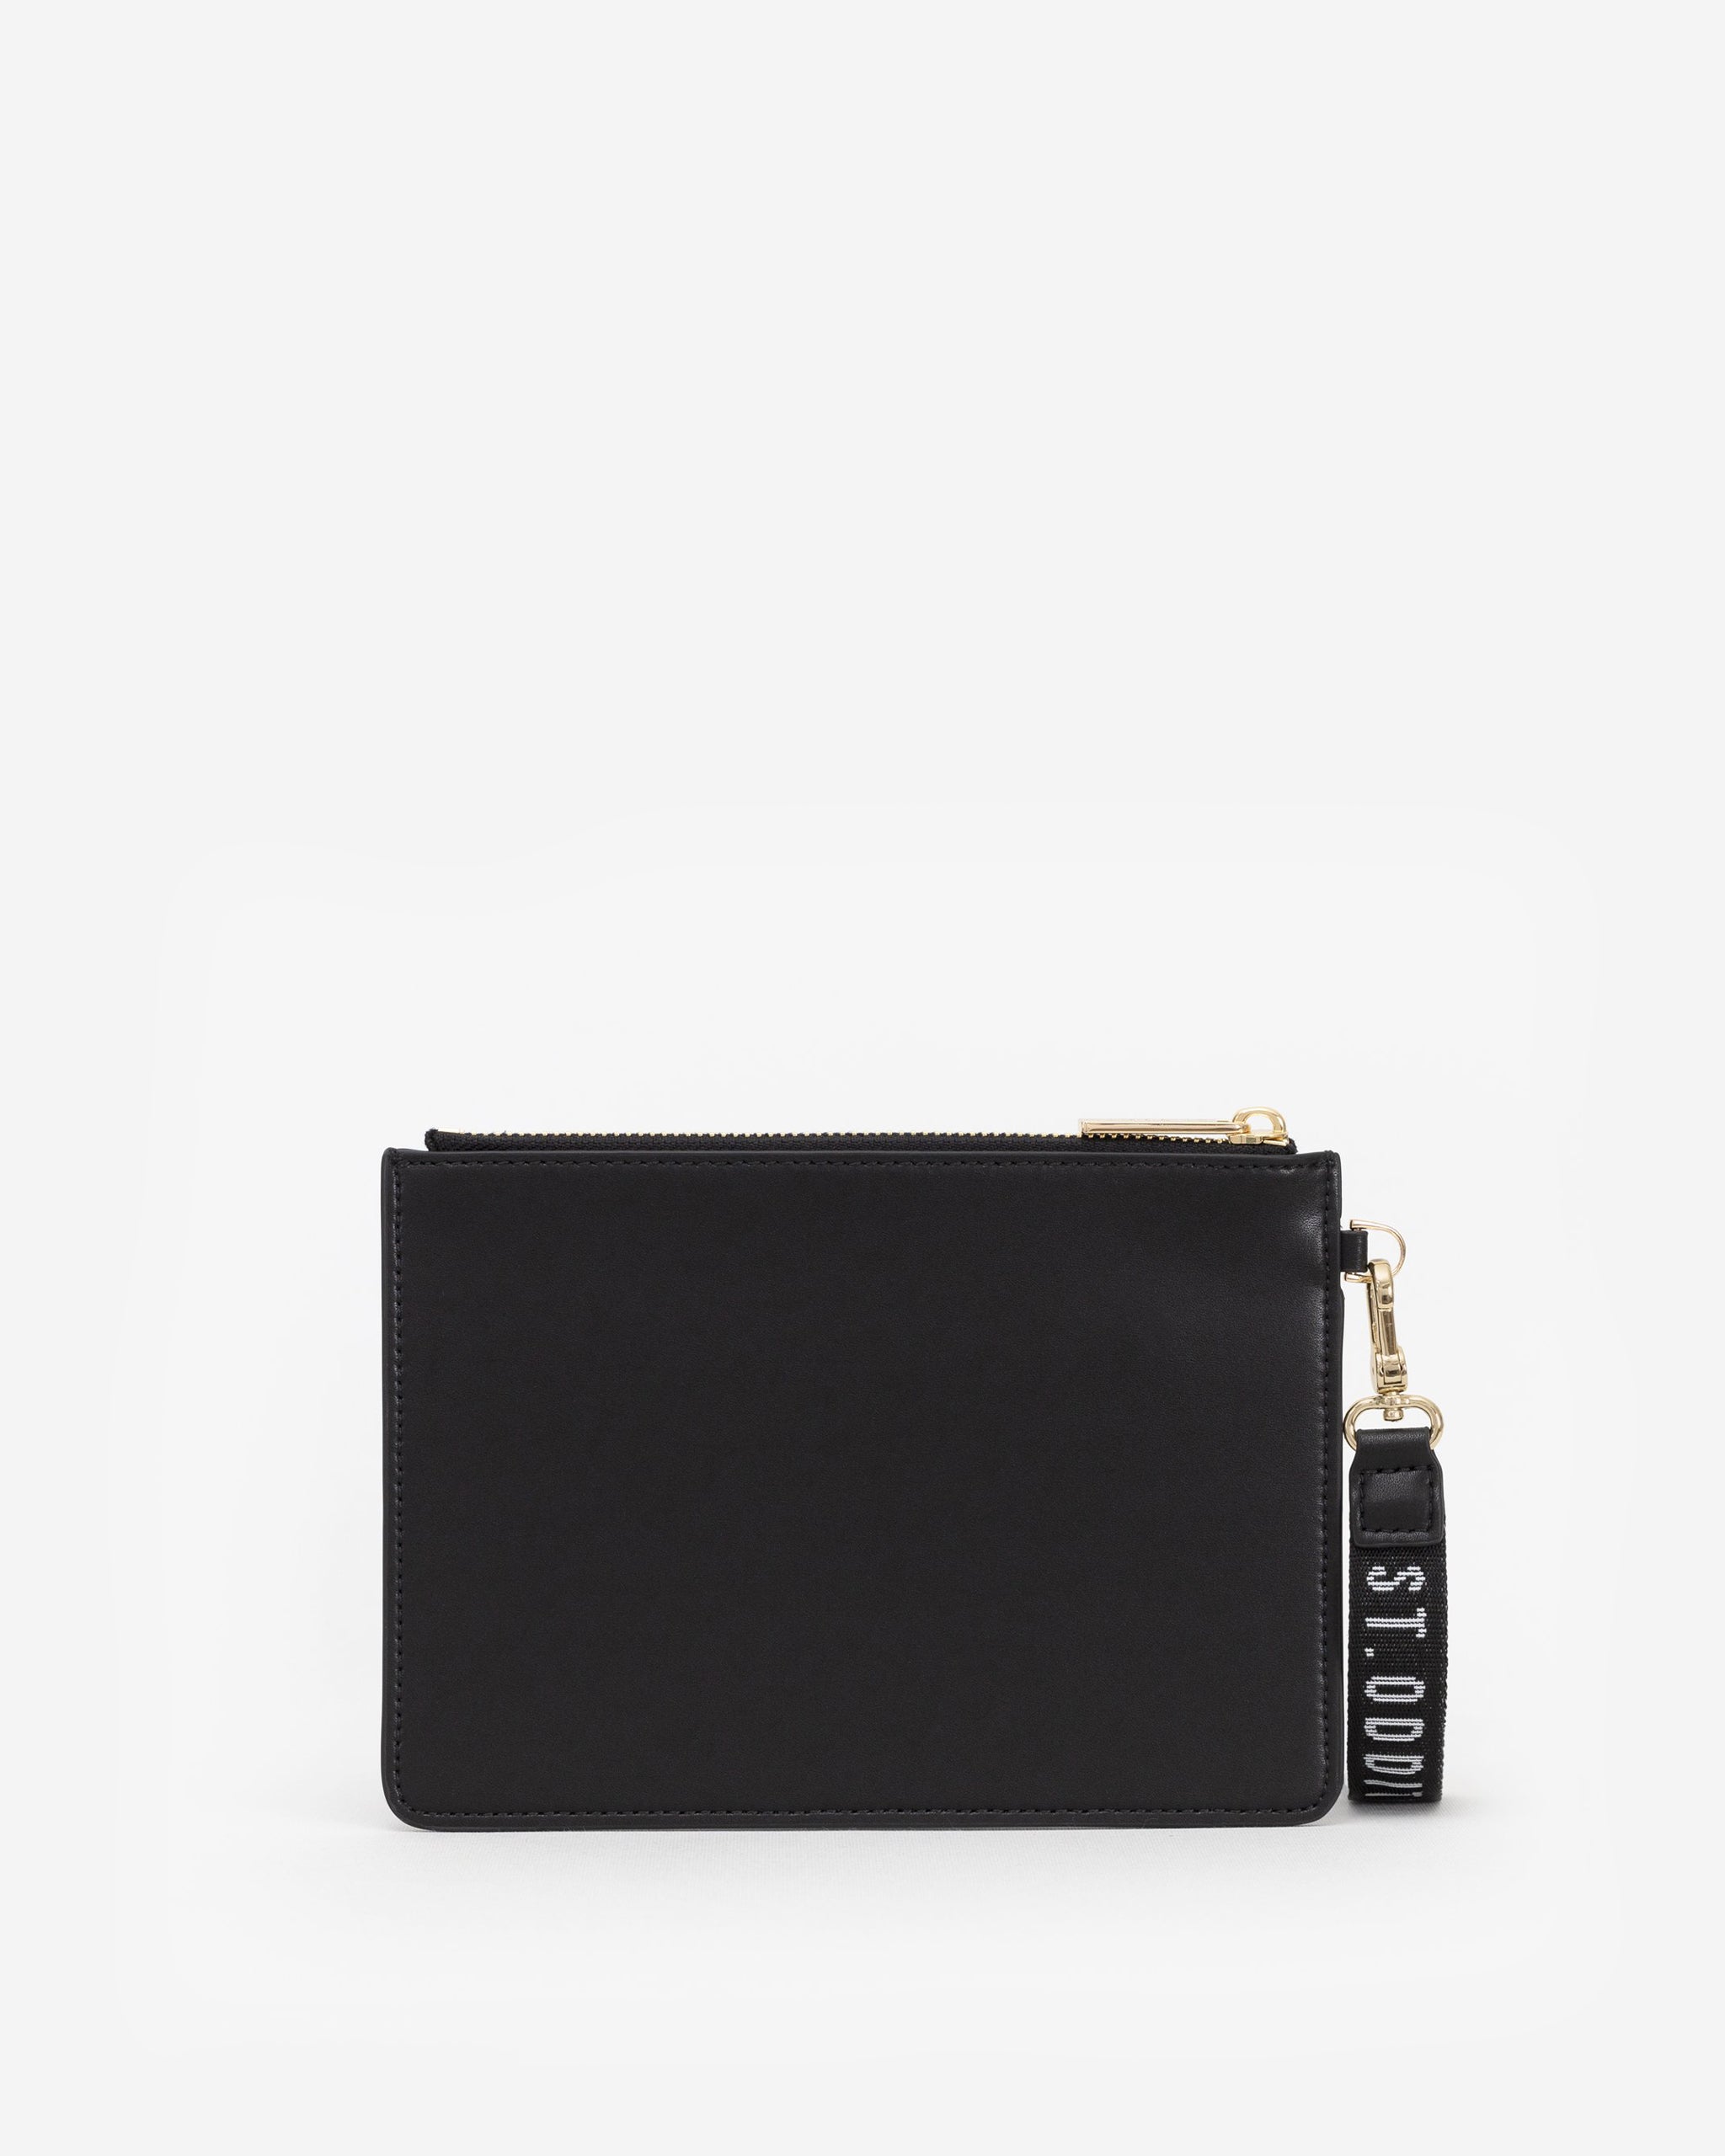 Pouch in Black/Gold with Personalised Hardware